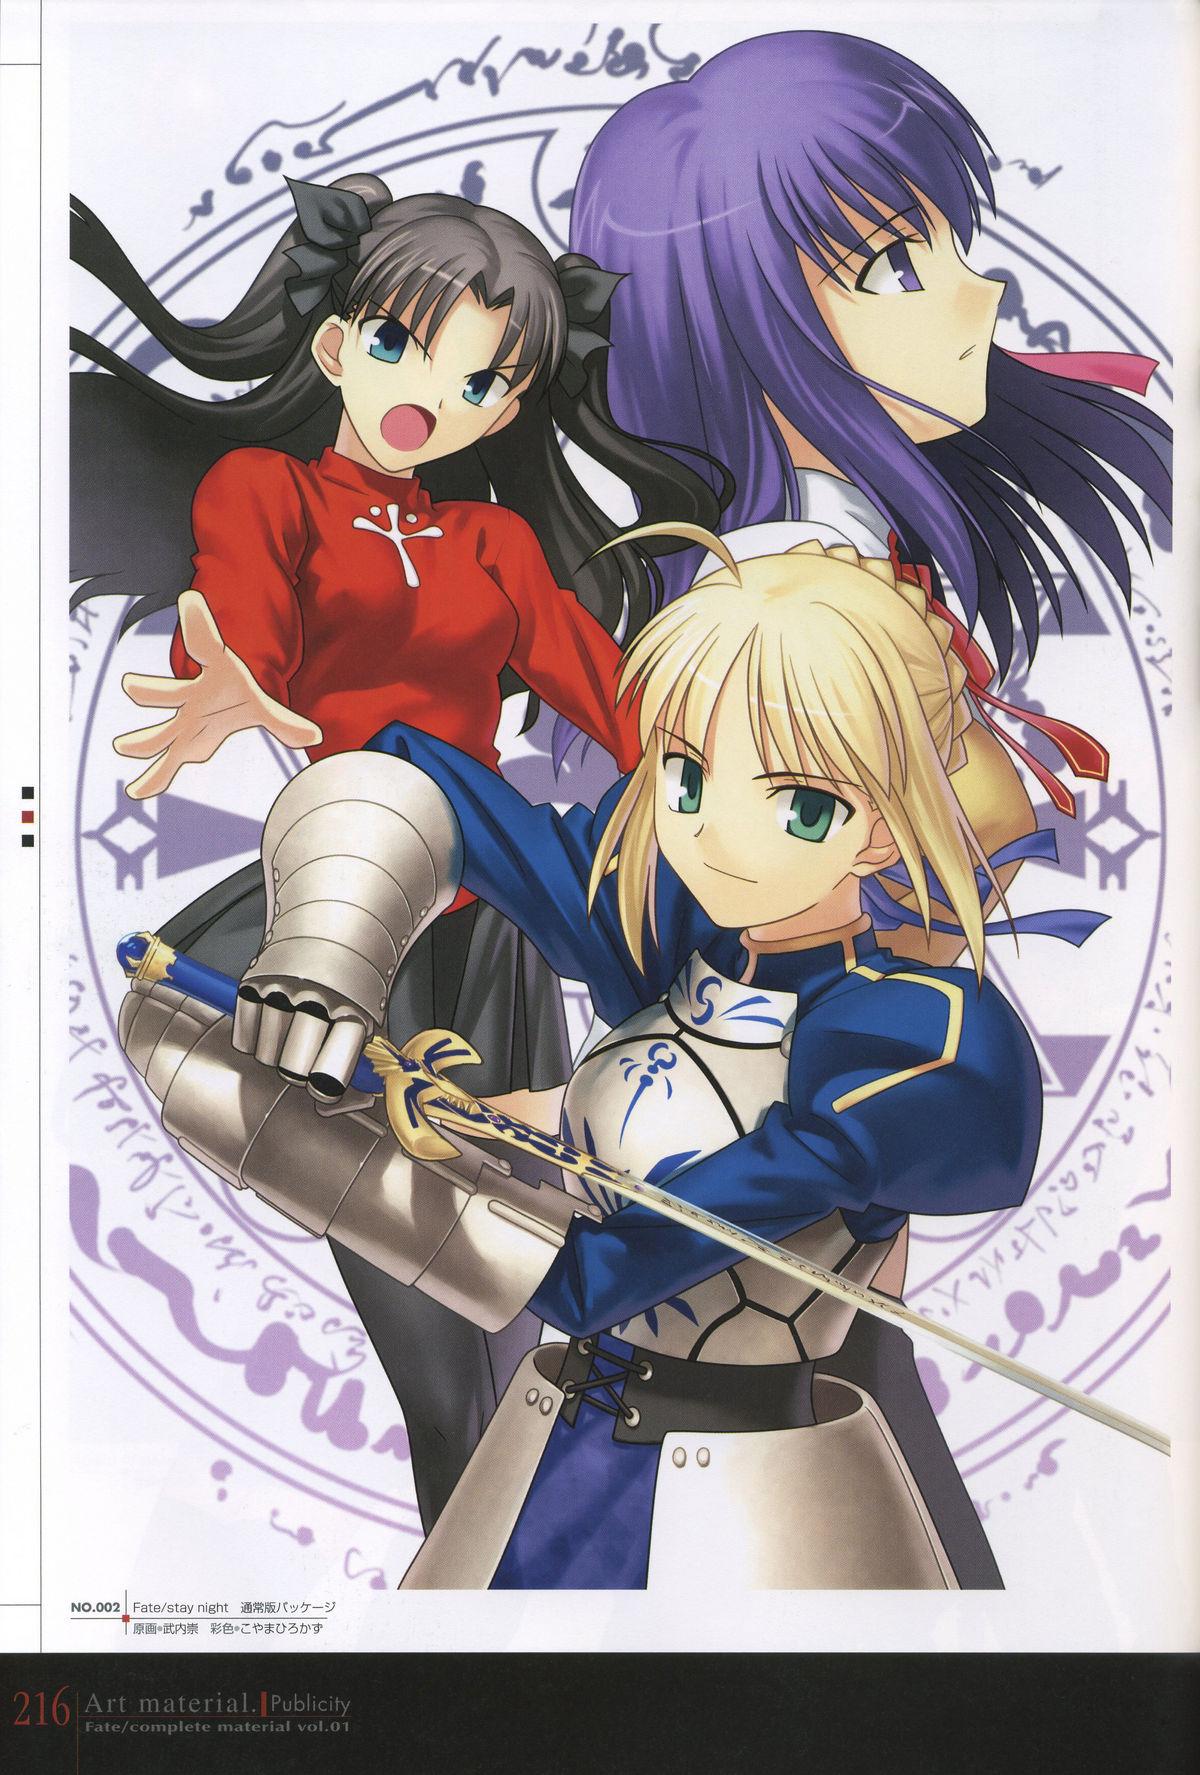 Fate/complete material I - Art material. 220